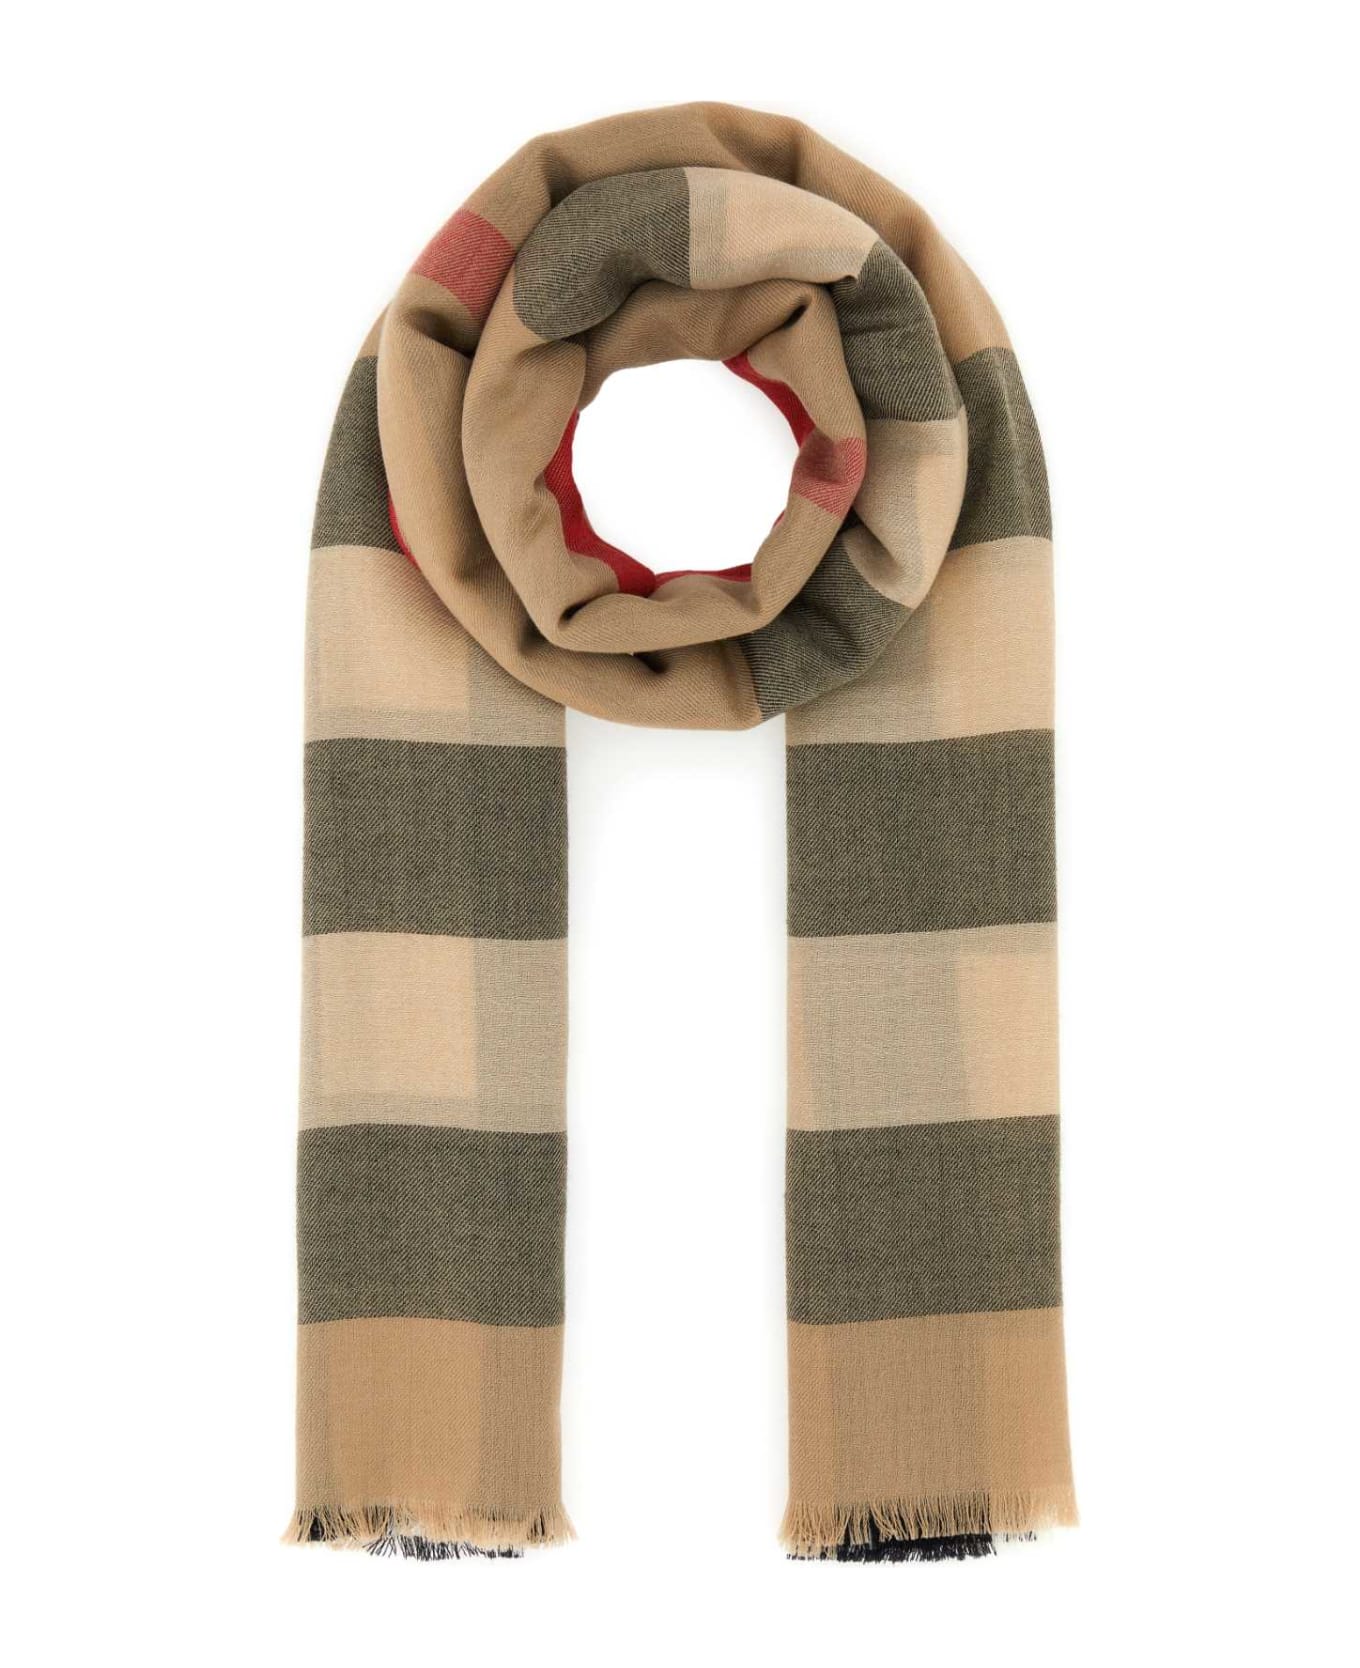 Burberry Embroidered Cashmere Scarf - A7028 スカーフ